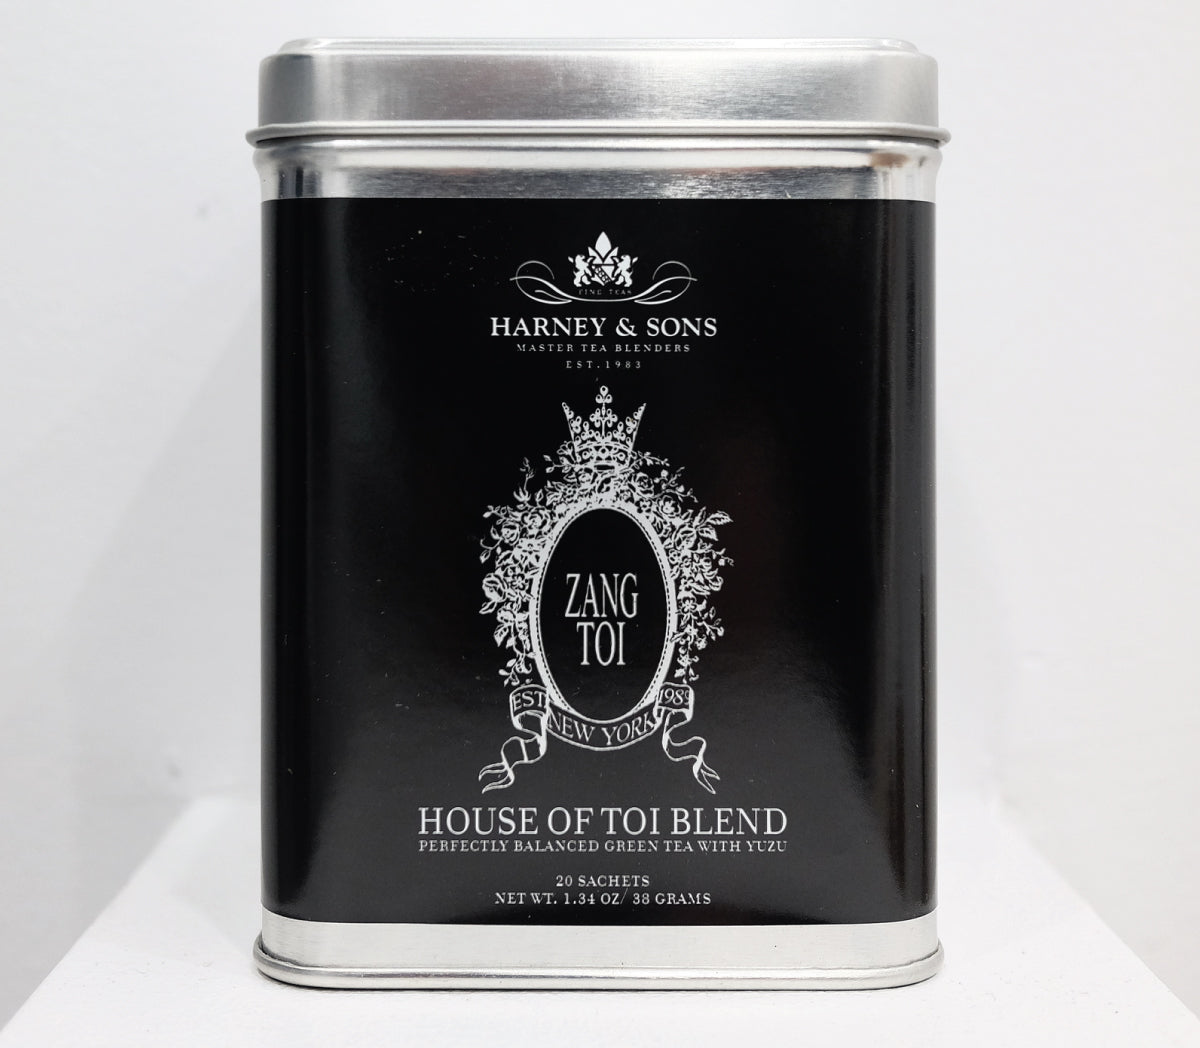 Harney & Sons House of Toi Blend